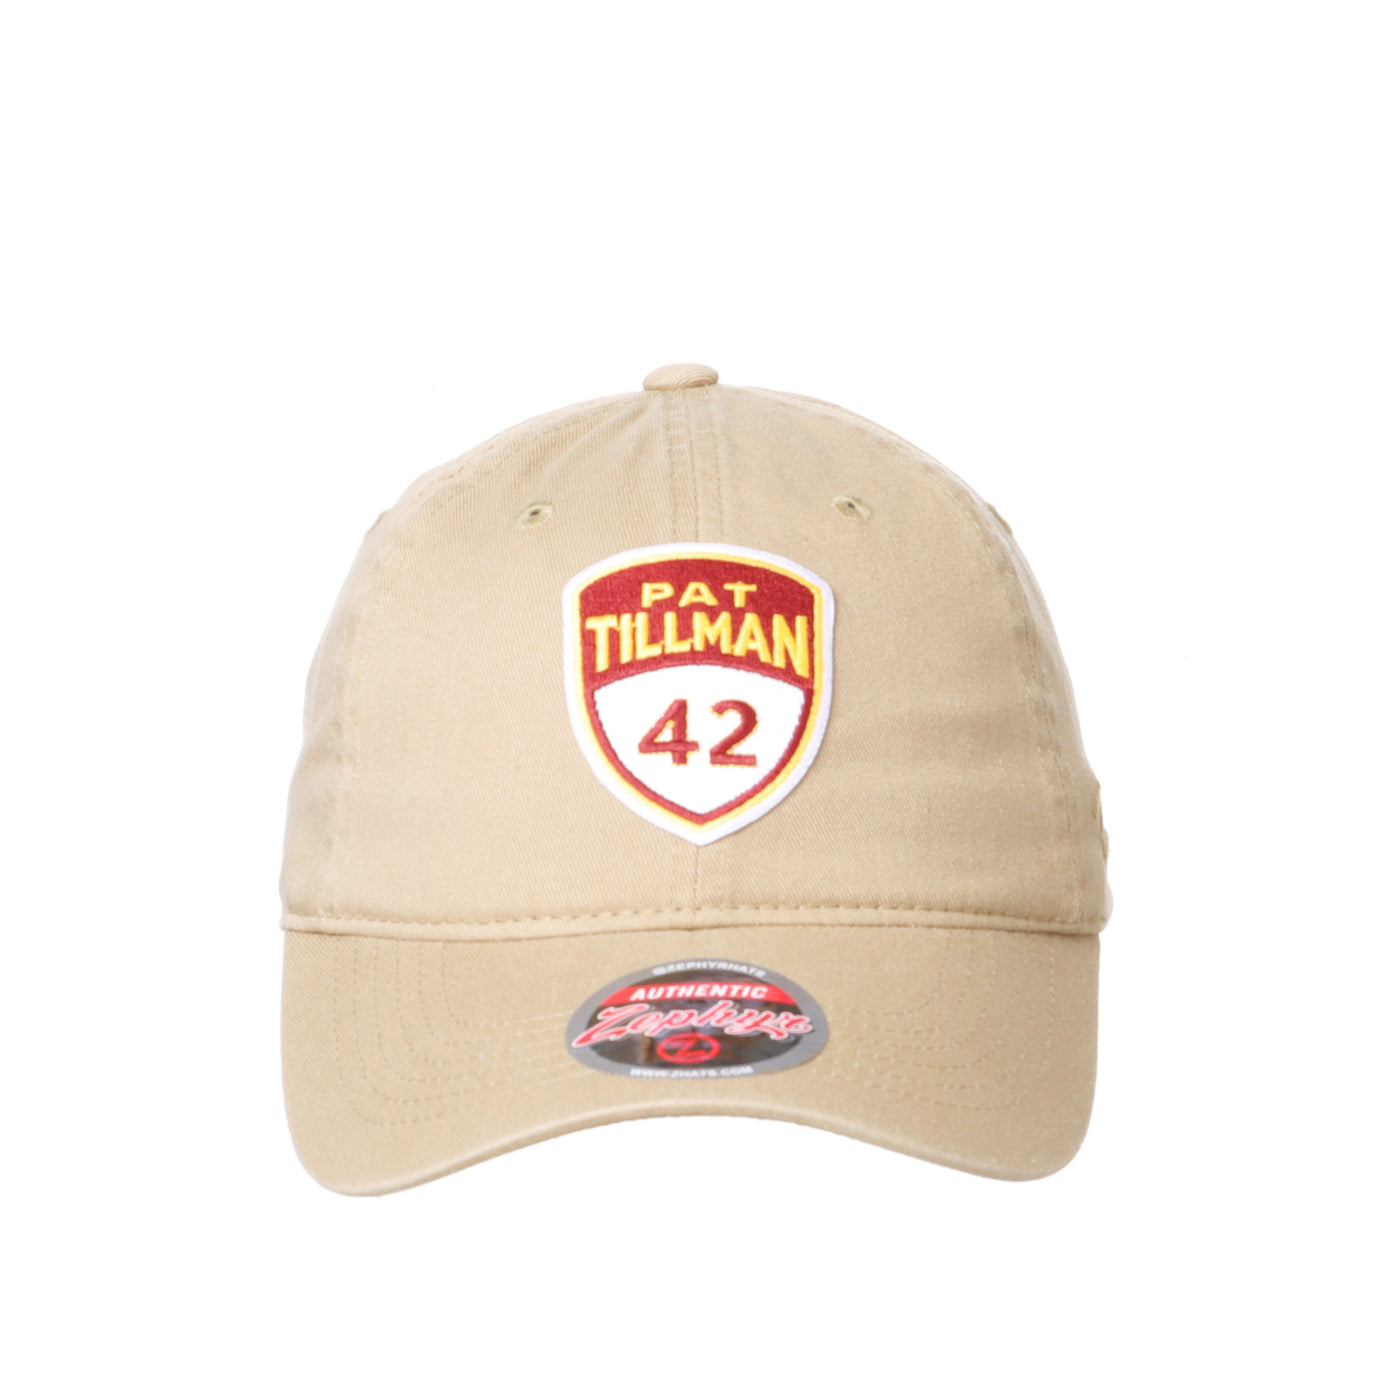 Shows the front of a khaki hat featuring a Pat Tillman shield on the front with a 42.